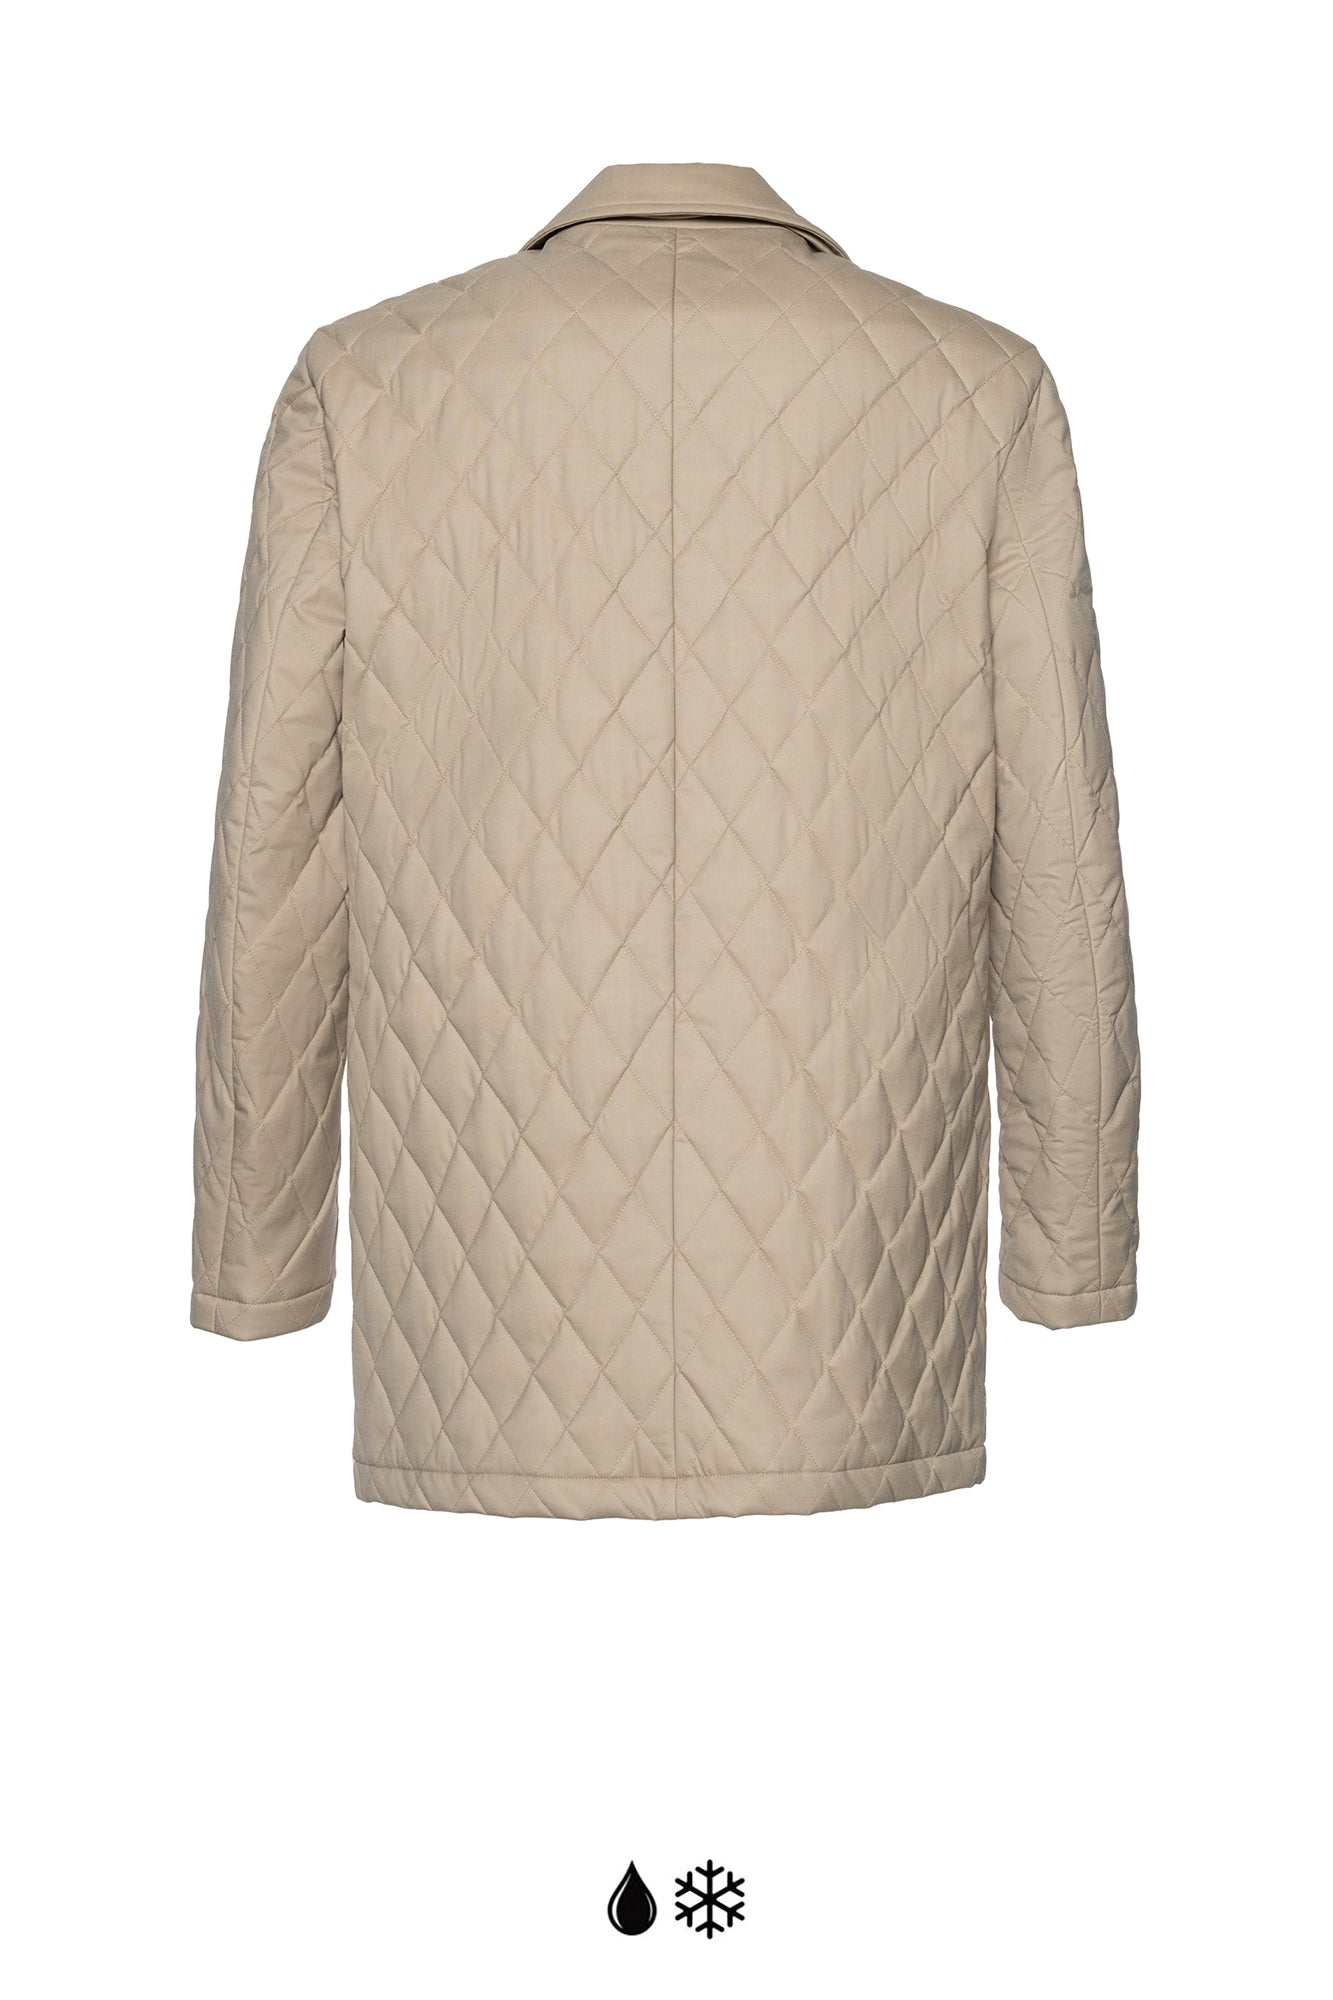 BYRON TAN DIAMOND QUILTED CARCOAT